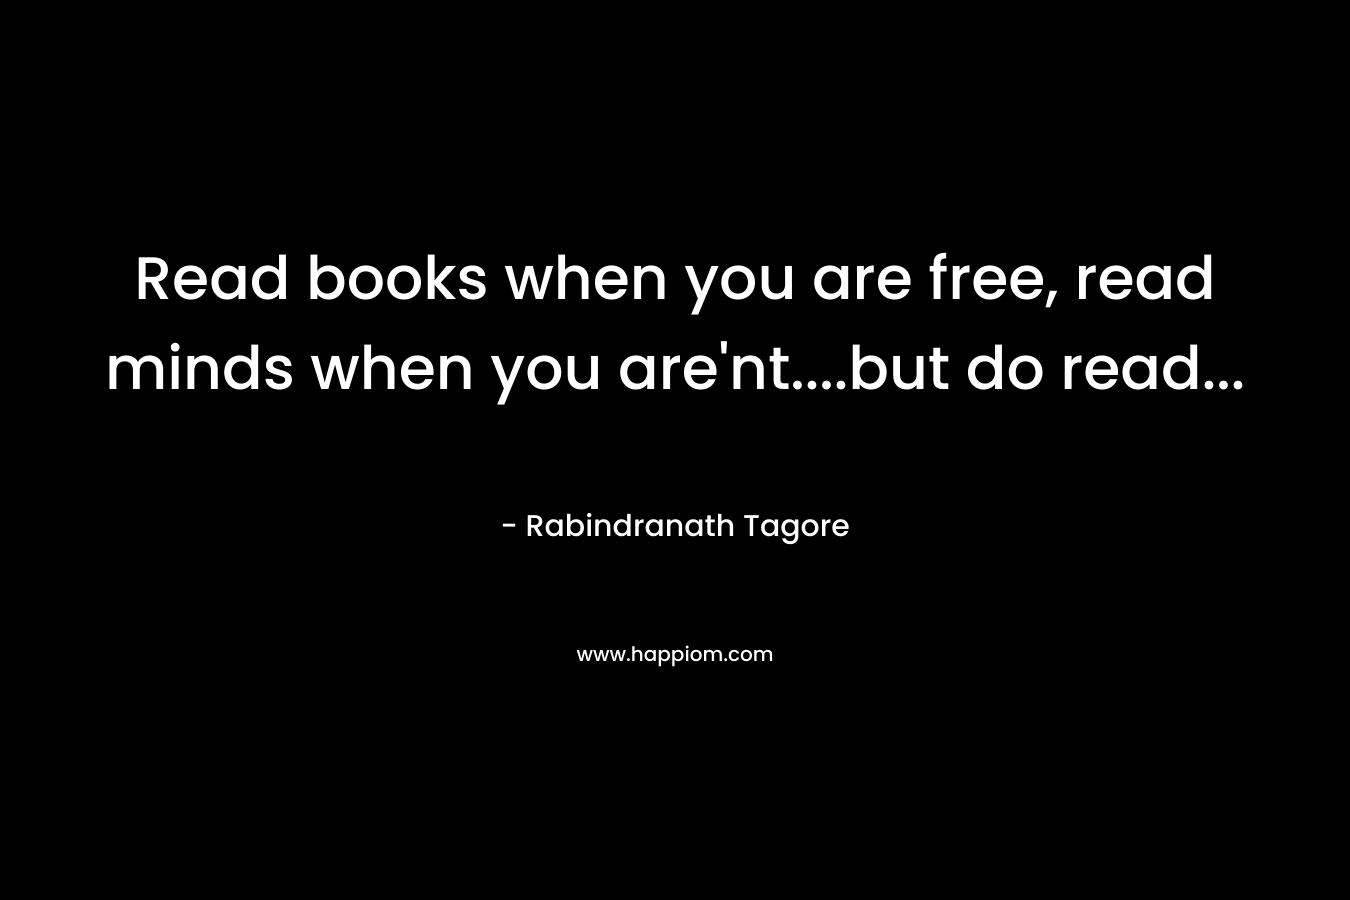 Read books when you are free, read minds when you are'nt....but do read...